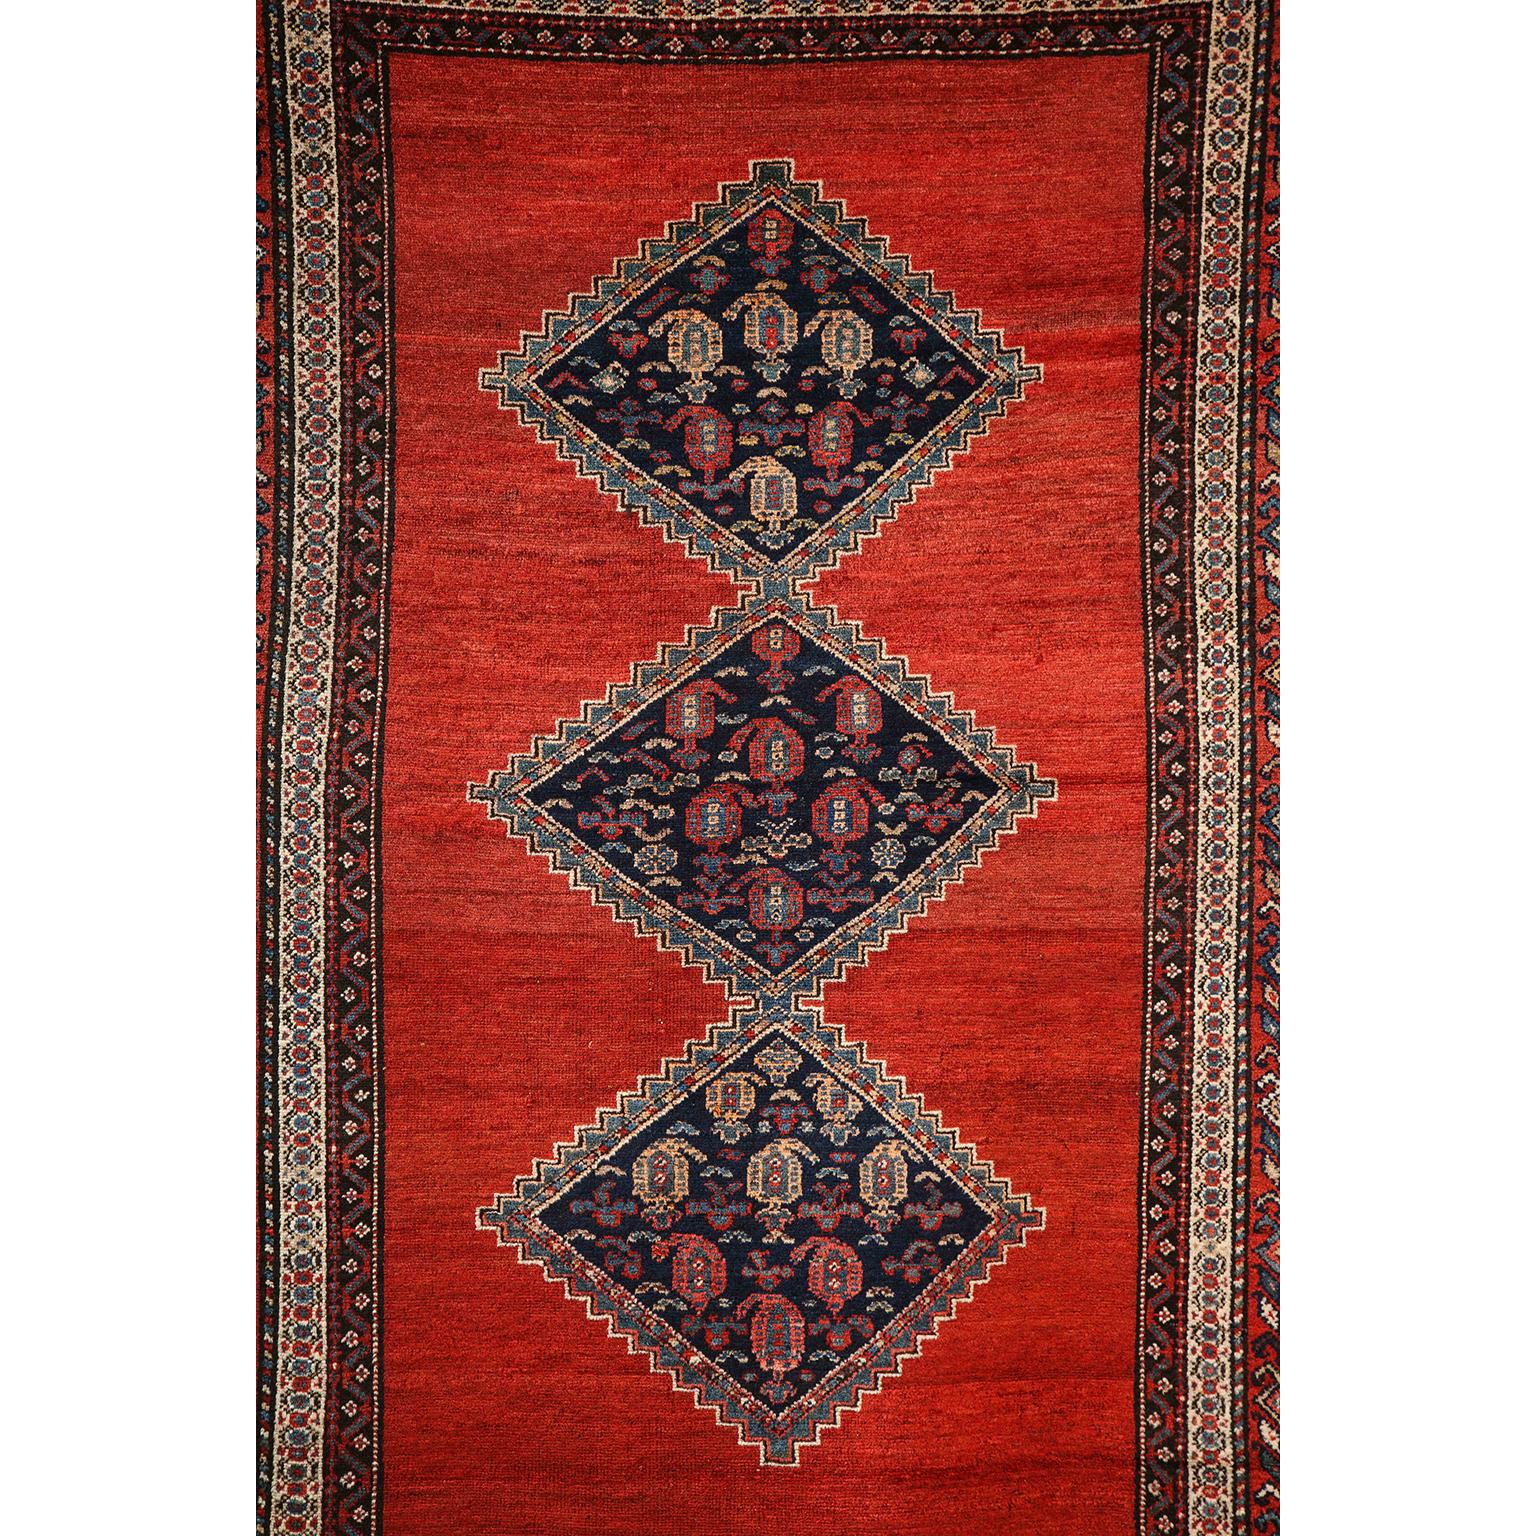 This antique Persian Malayer carpet in pure wool and vegetable dyes circa 1900 features a triple diamond central medallion with an intricate multiple band border and vibrant red field. Its organic coloration of vegetable dyed red and indigo creates